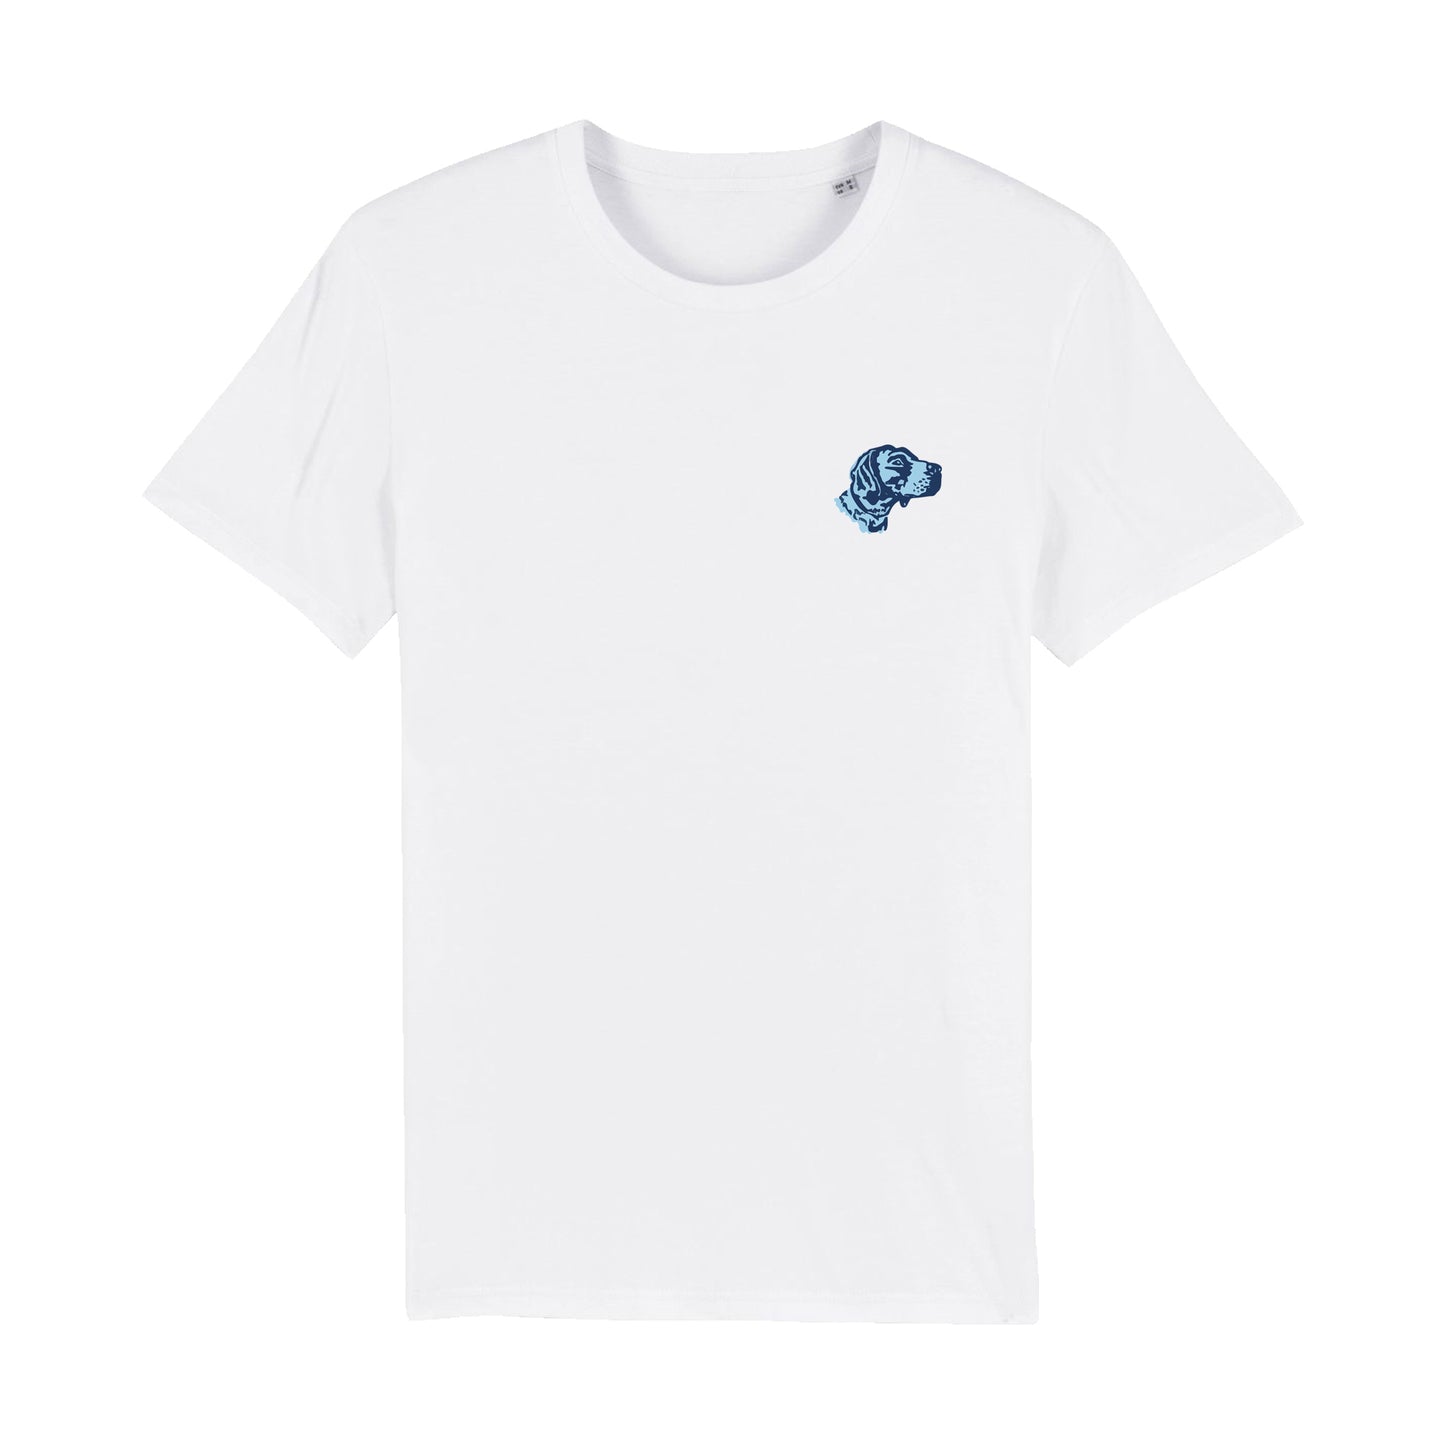 BlackHound Collection T-shirt - Lily